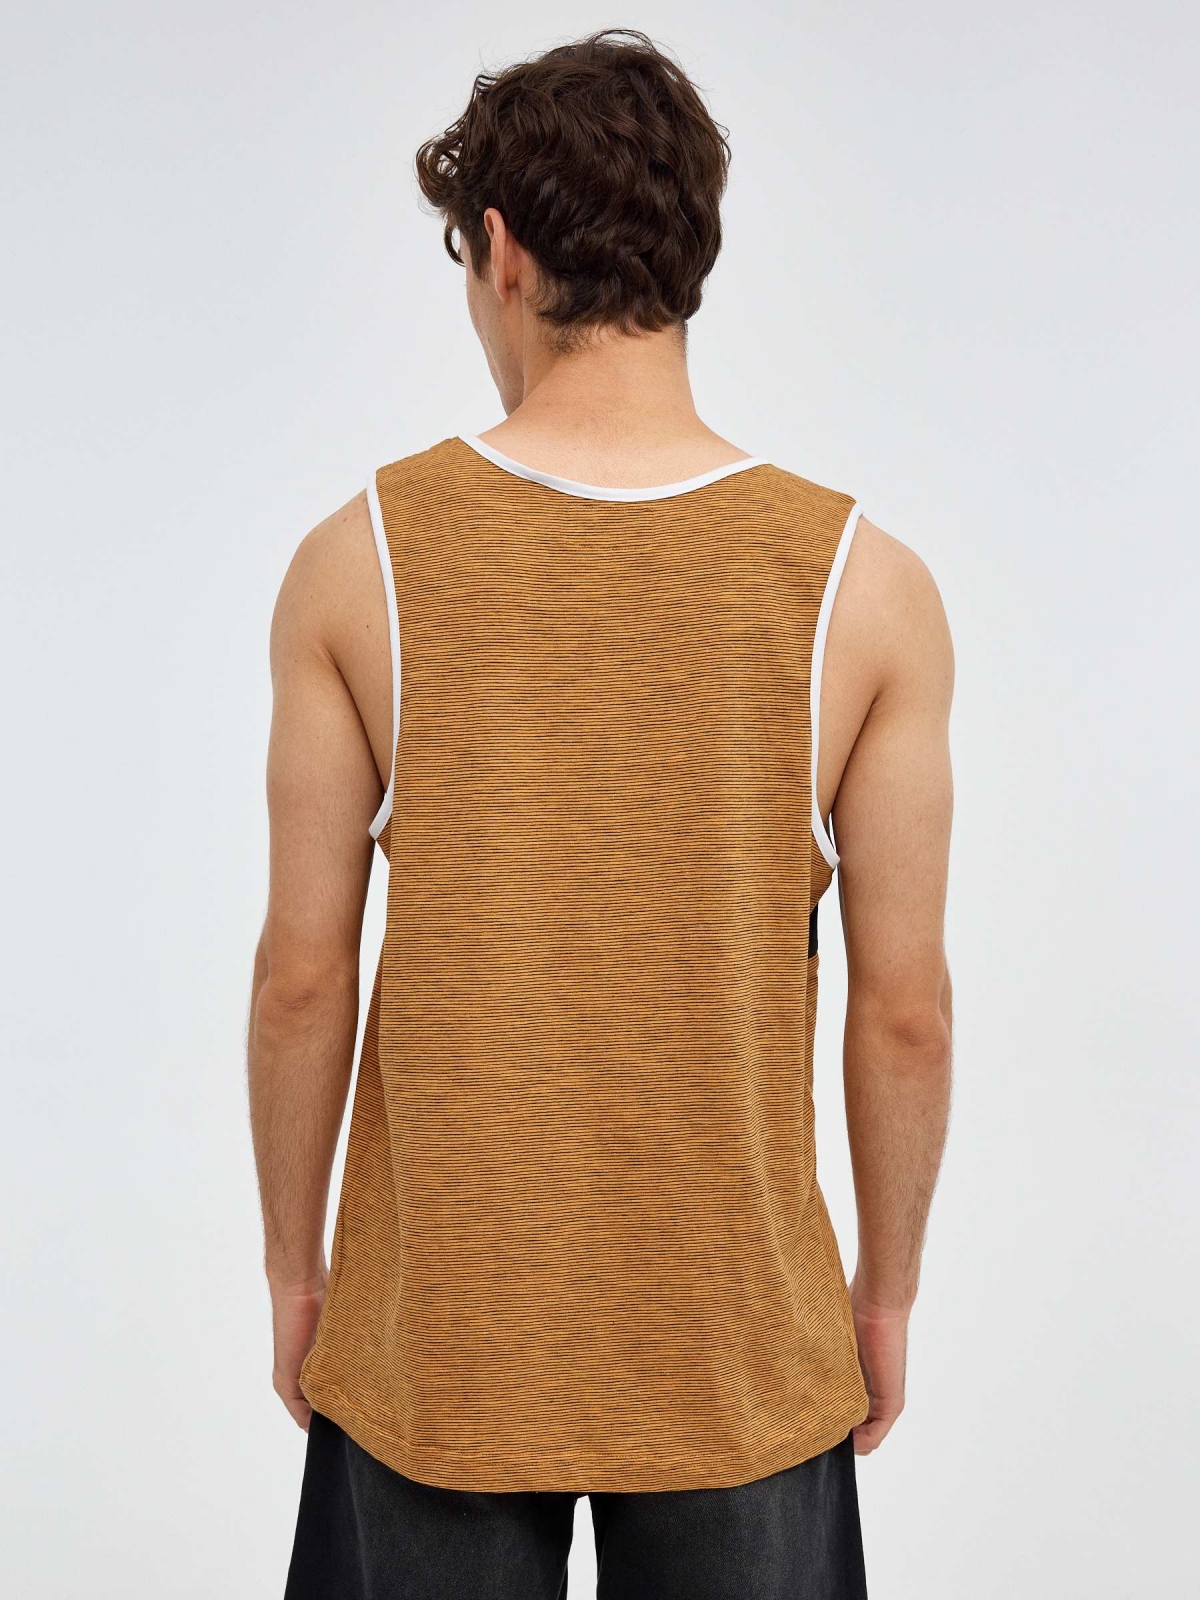 AFTW tank top ochre middle back view